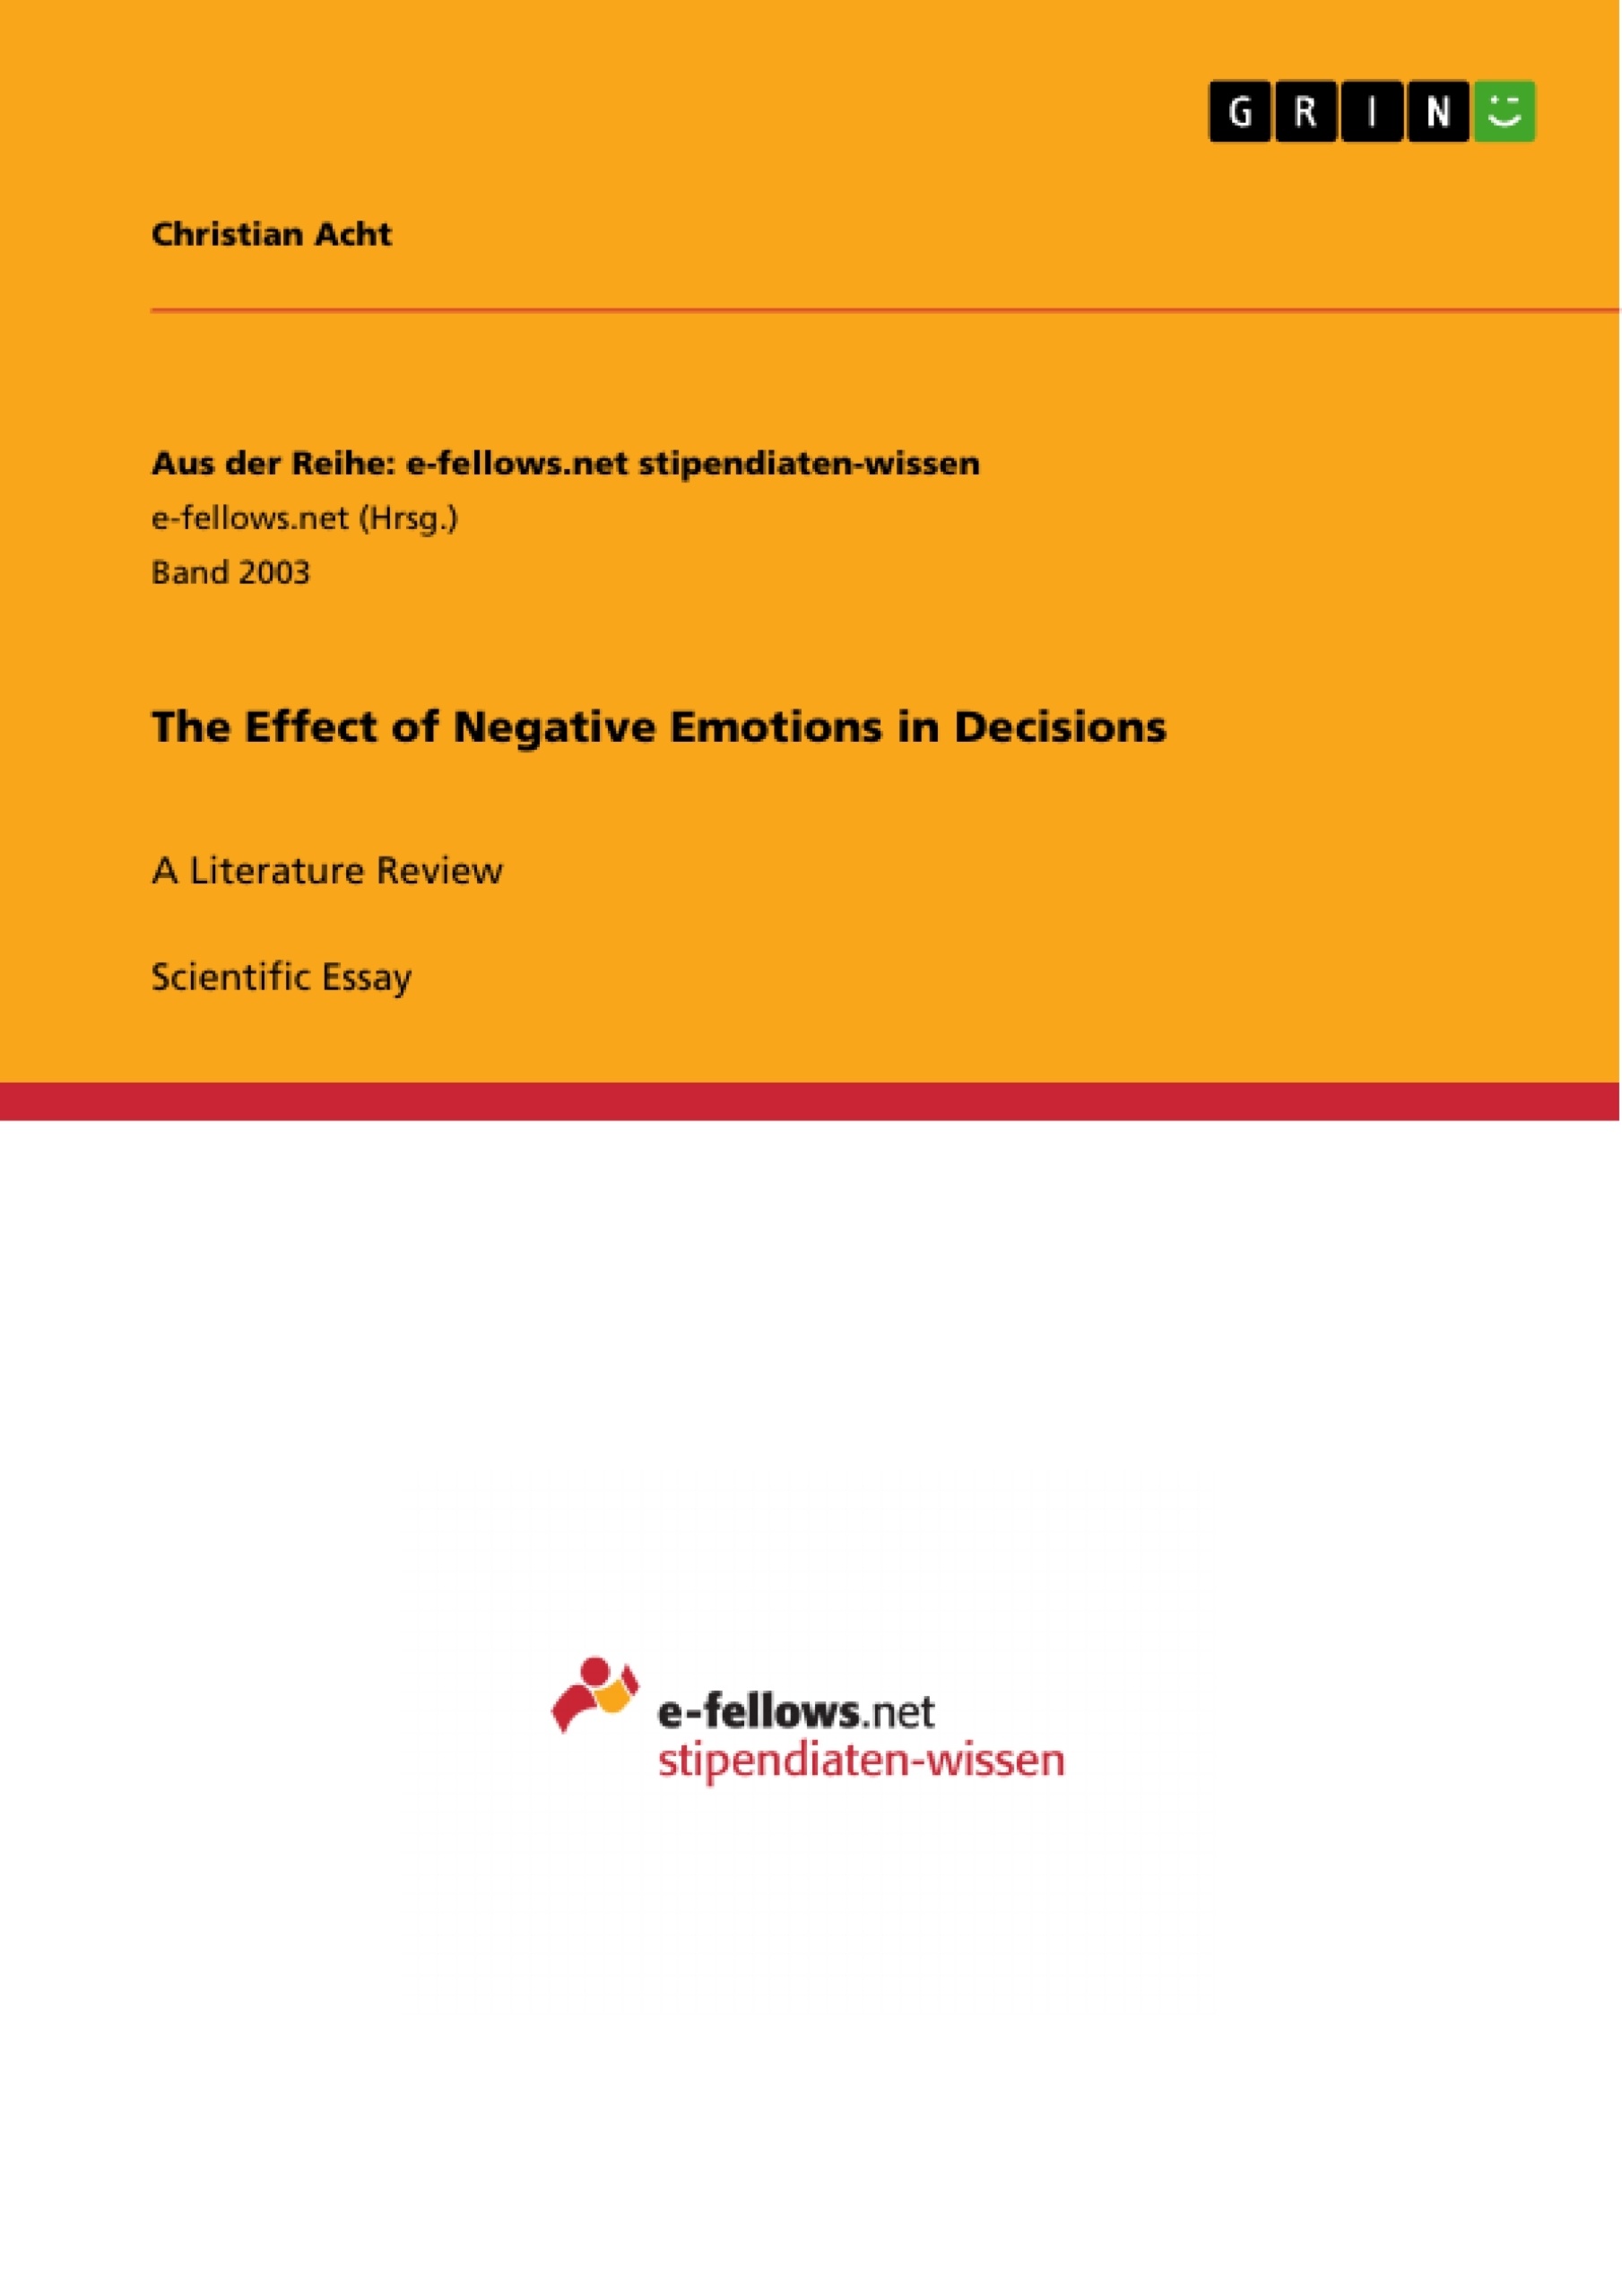 Title: The Effect of Negative Emotions in Decisions